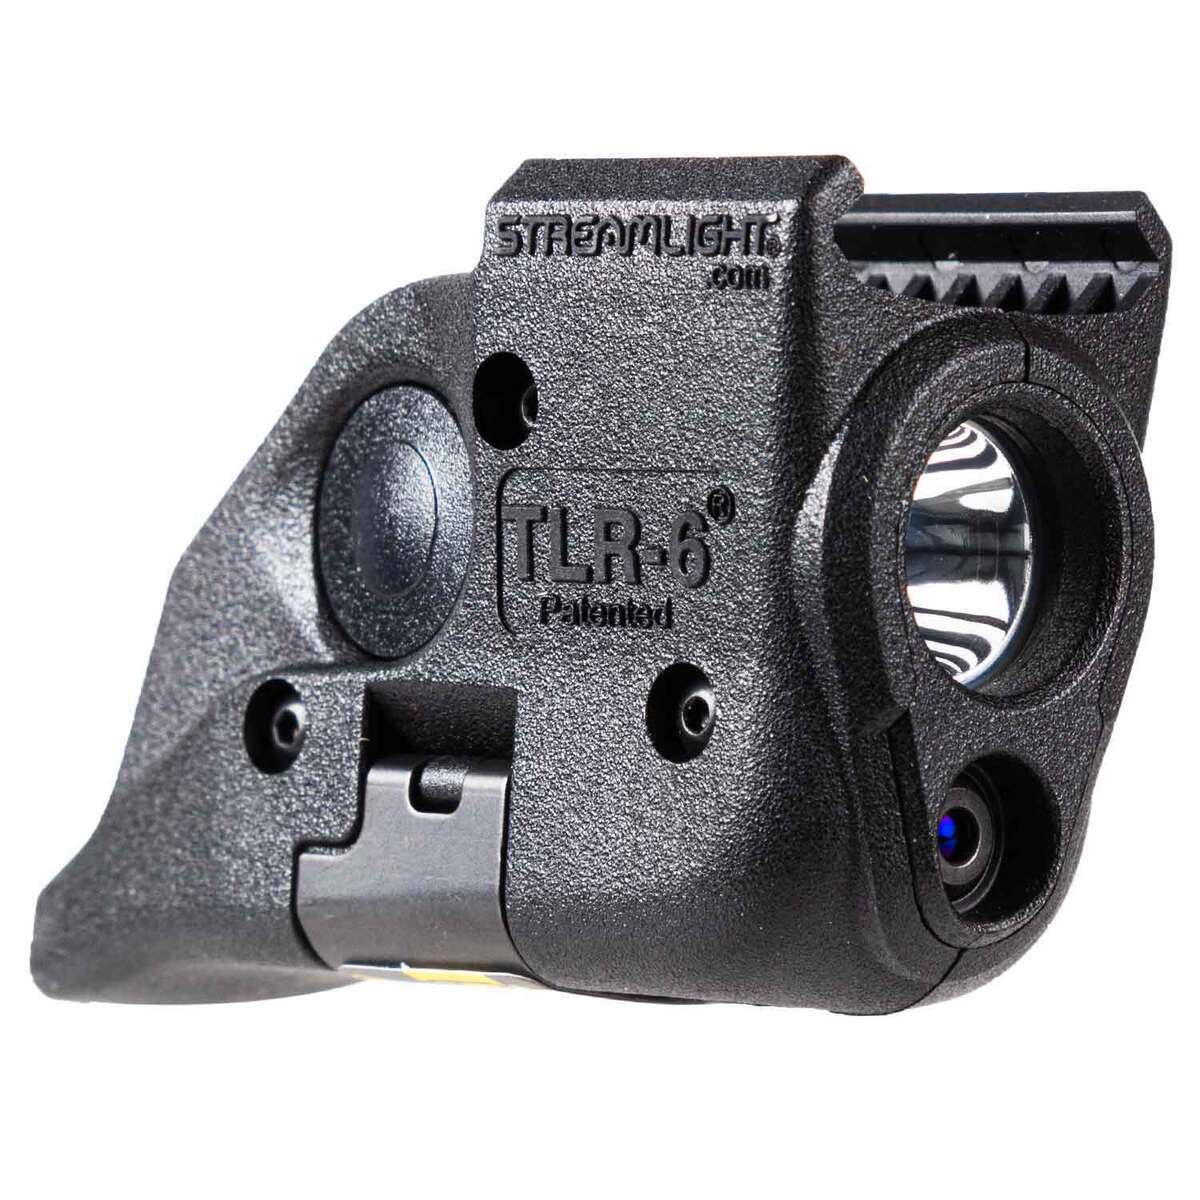 Streamlight TLR-6 Tactical Weapon Light With Red Laser - Glock 26, 27, 33